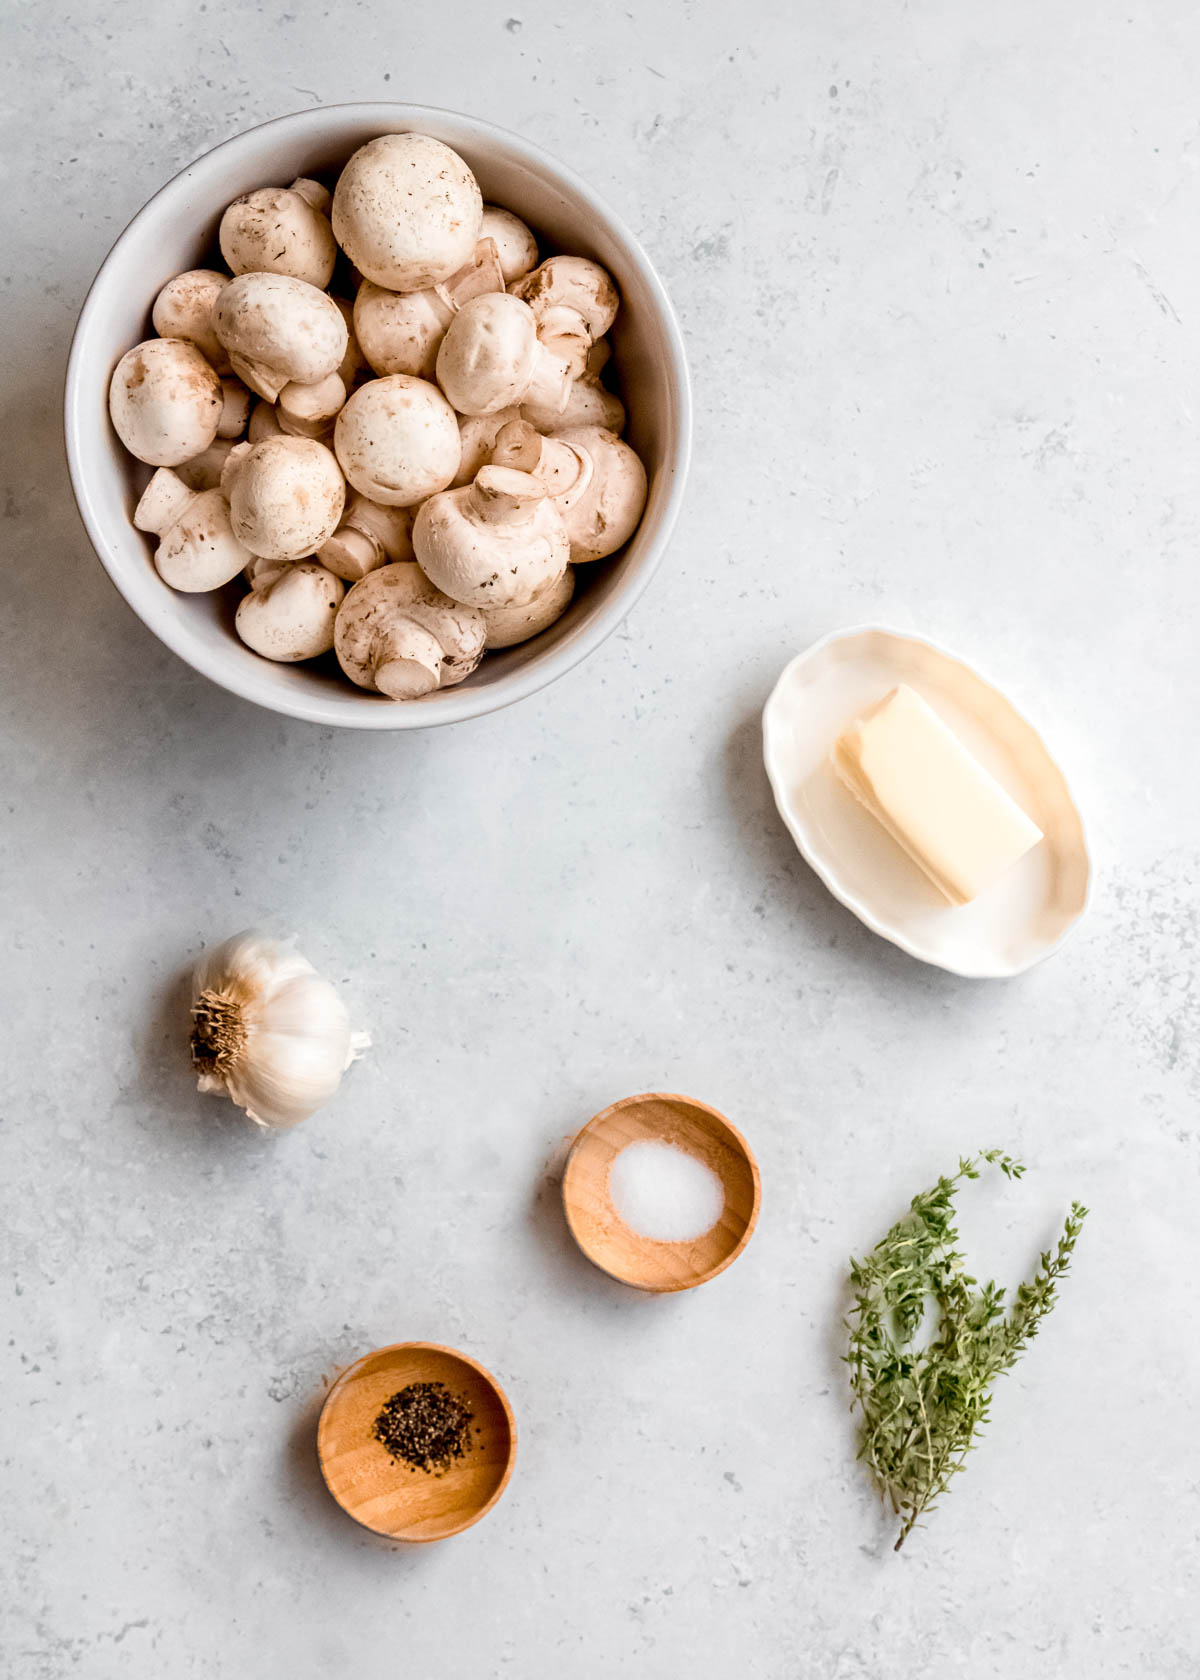 garlic butter mushroom ingredients on a white table